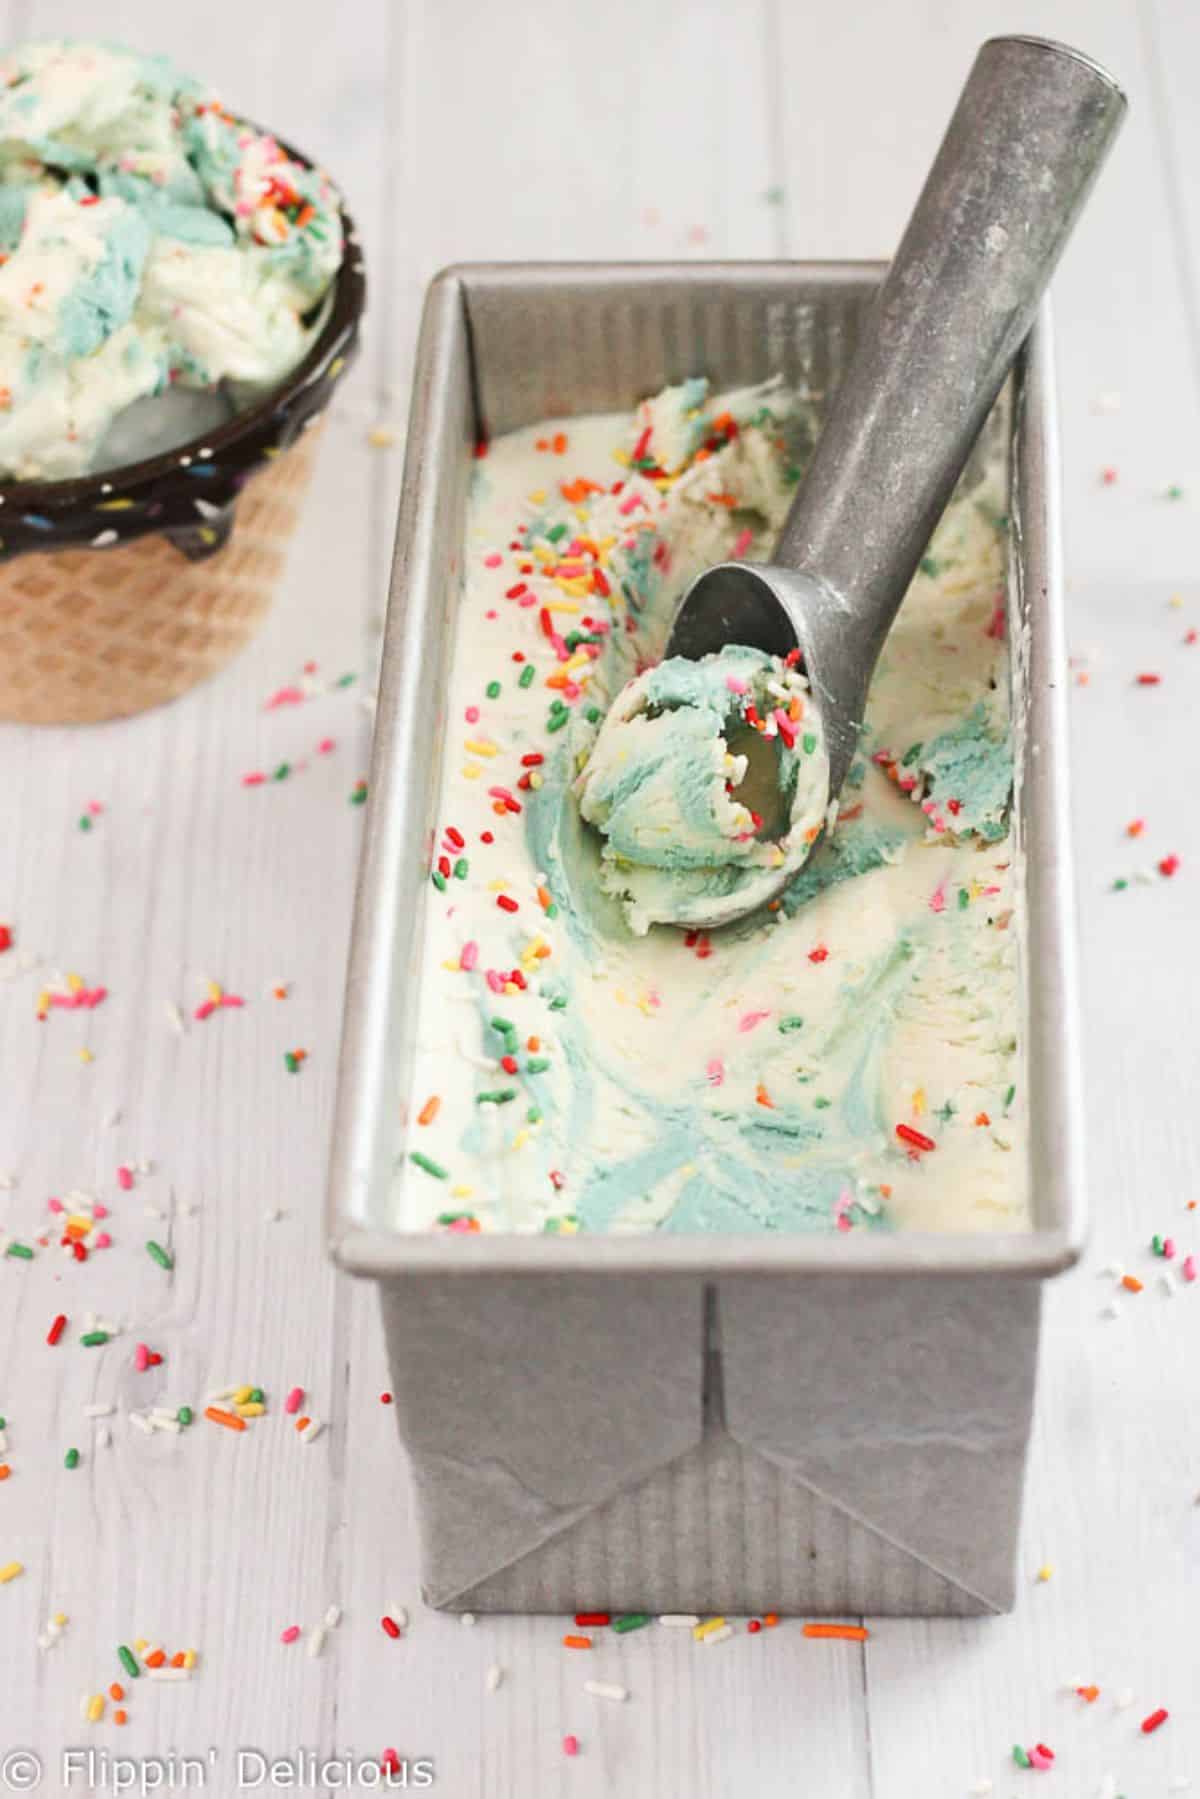 Gluten-free Cake Batter Ice Cream in a container with a spoon.